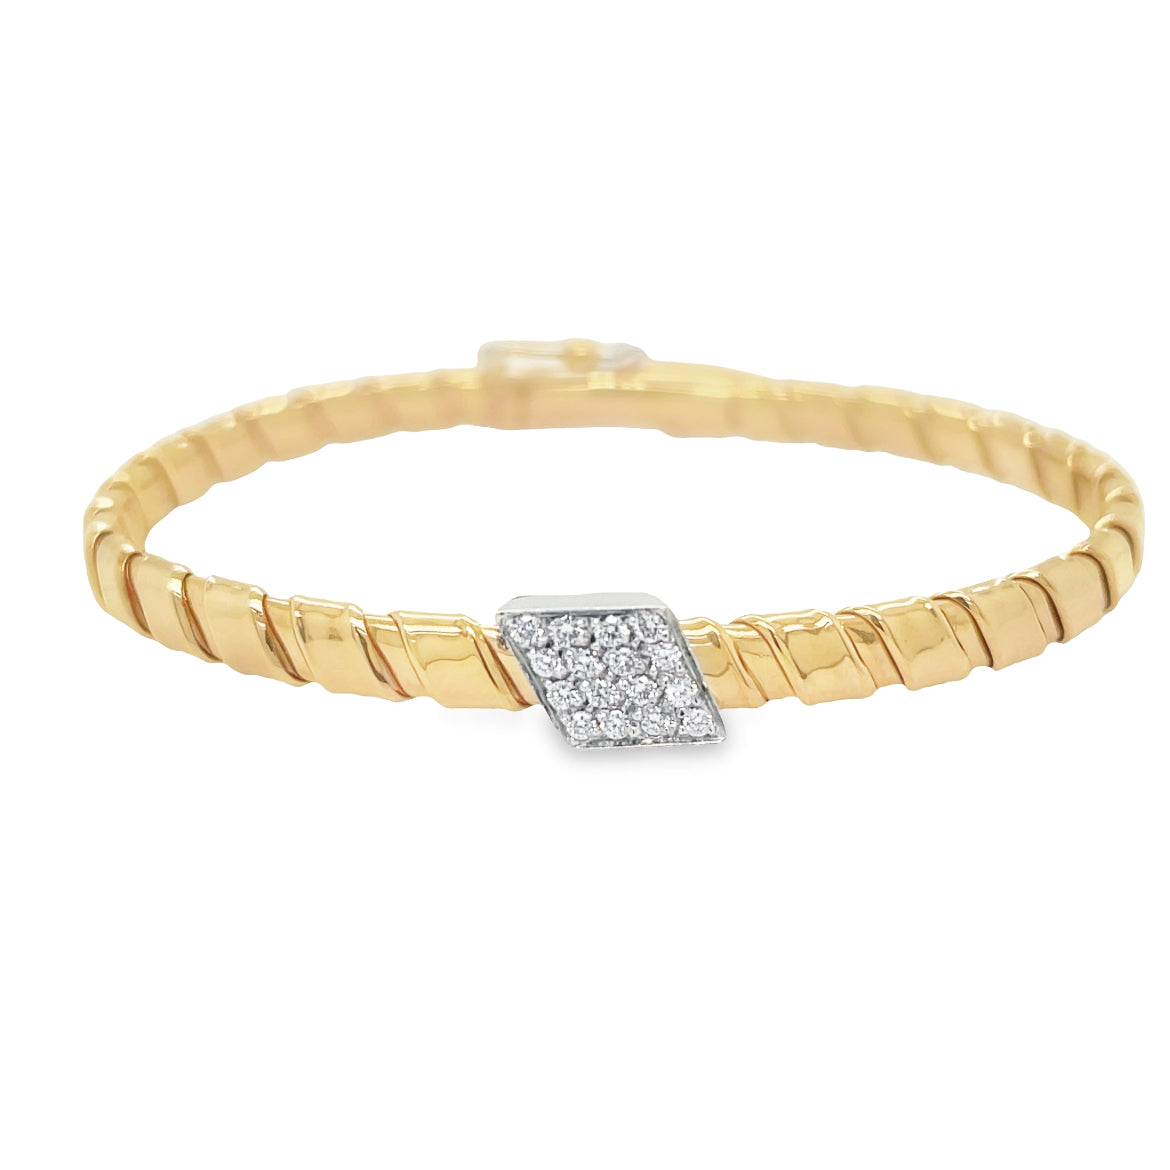 Experience the luxe of Italian craftsmanship with this artisanal 18K two-tone gold bangle bracelet. Featuring Novecentonovantanove's innovative tubogas technique for comfortable and flexible wear, this contemporary bracelet is punctuated with 0.16 cts of round diamonds for a timeless look. An ideal piece for any occasion.